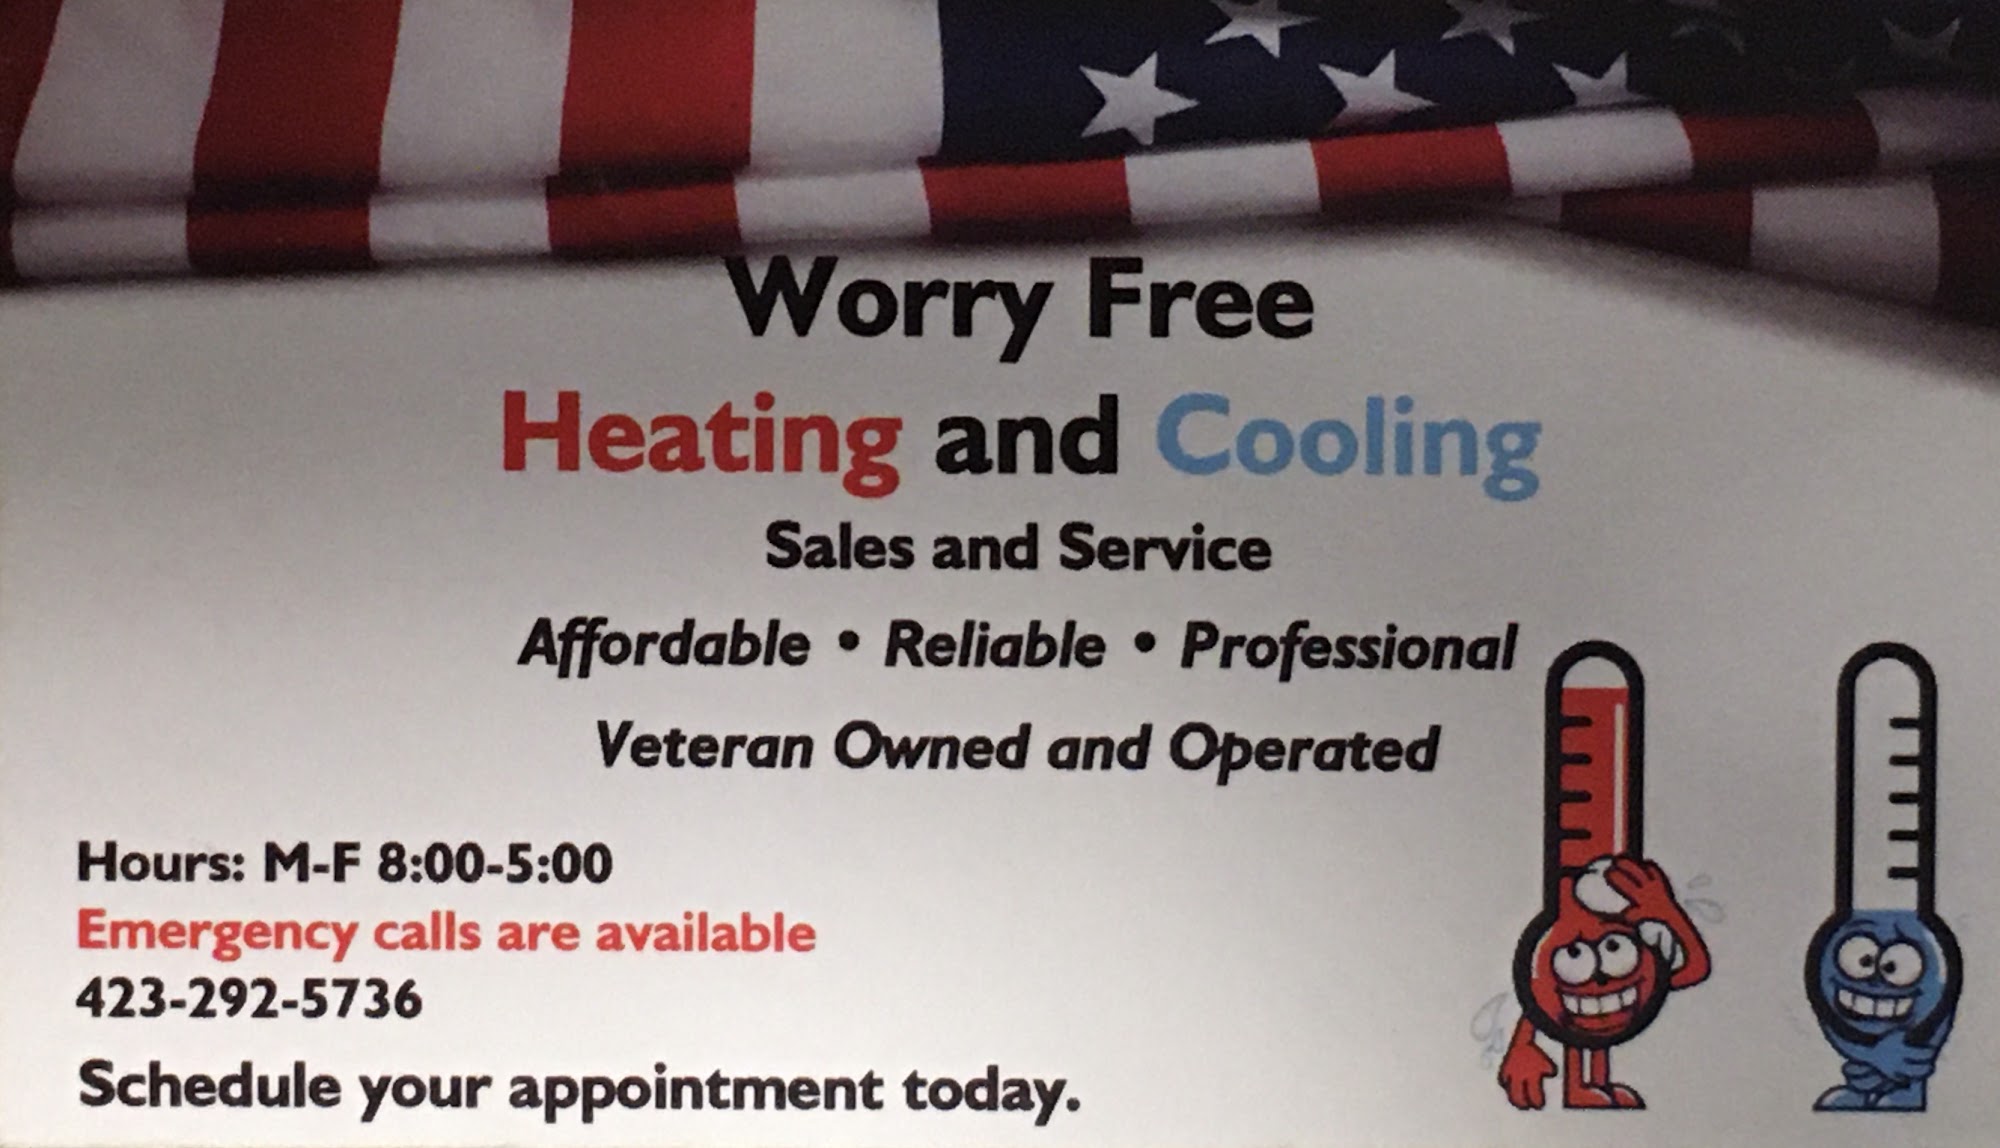 Worry Free Heating and Cooling